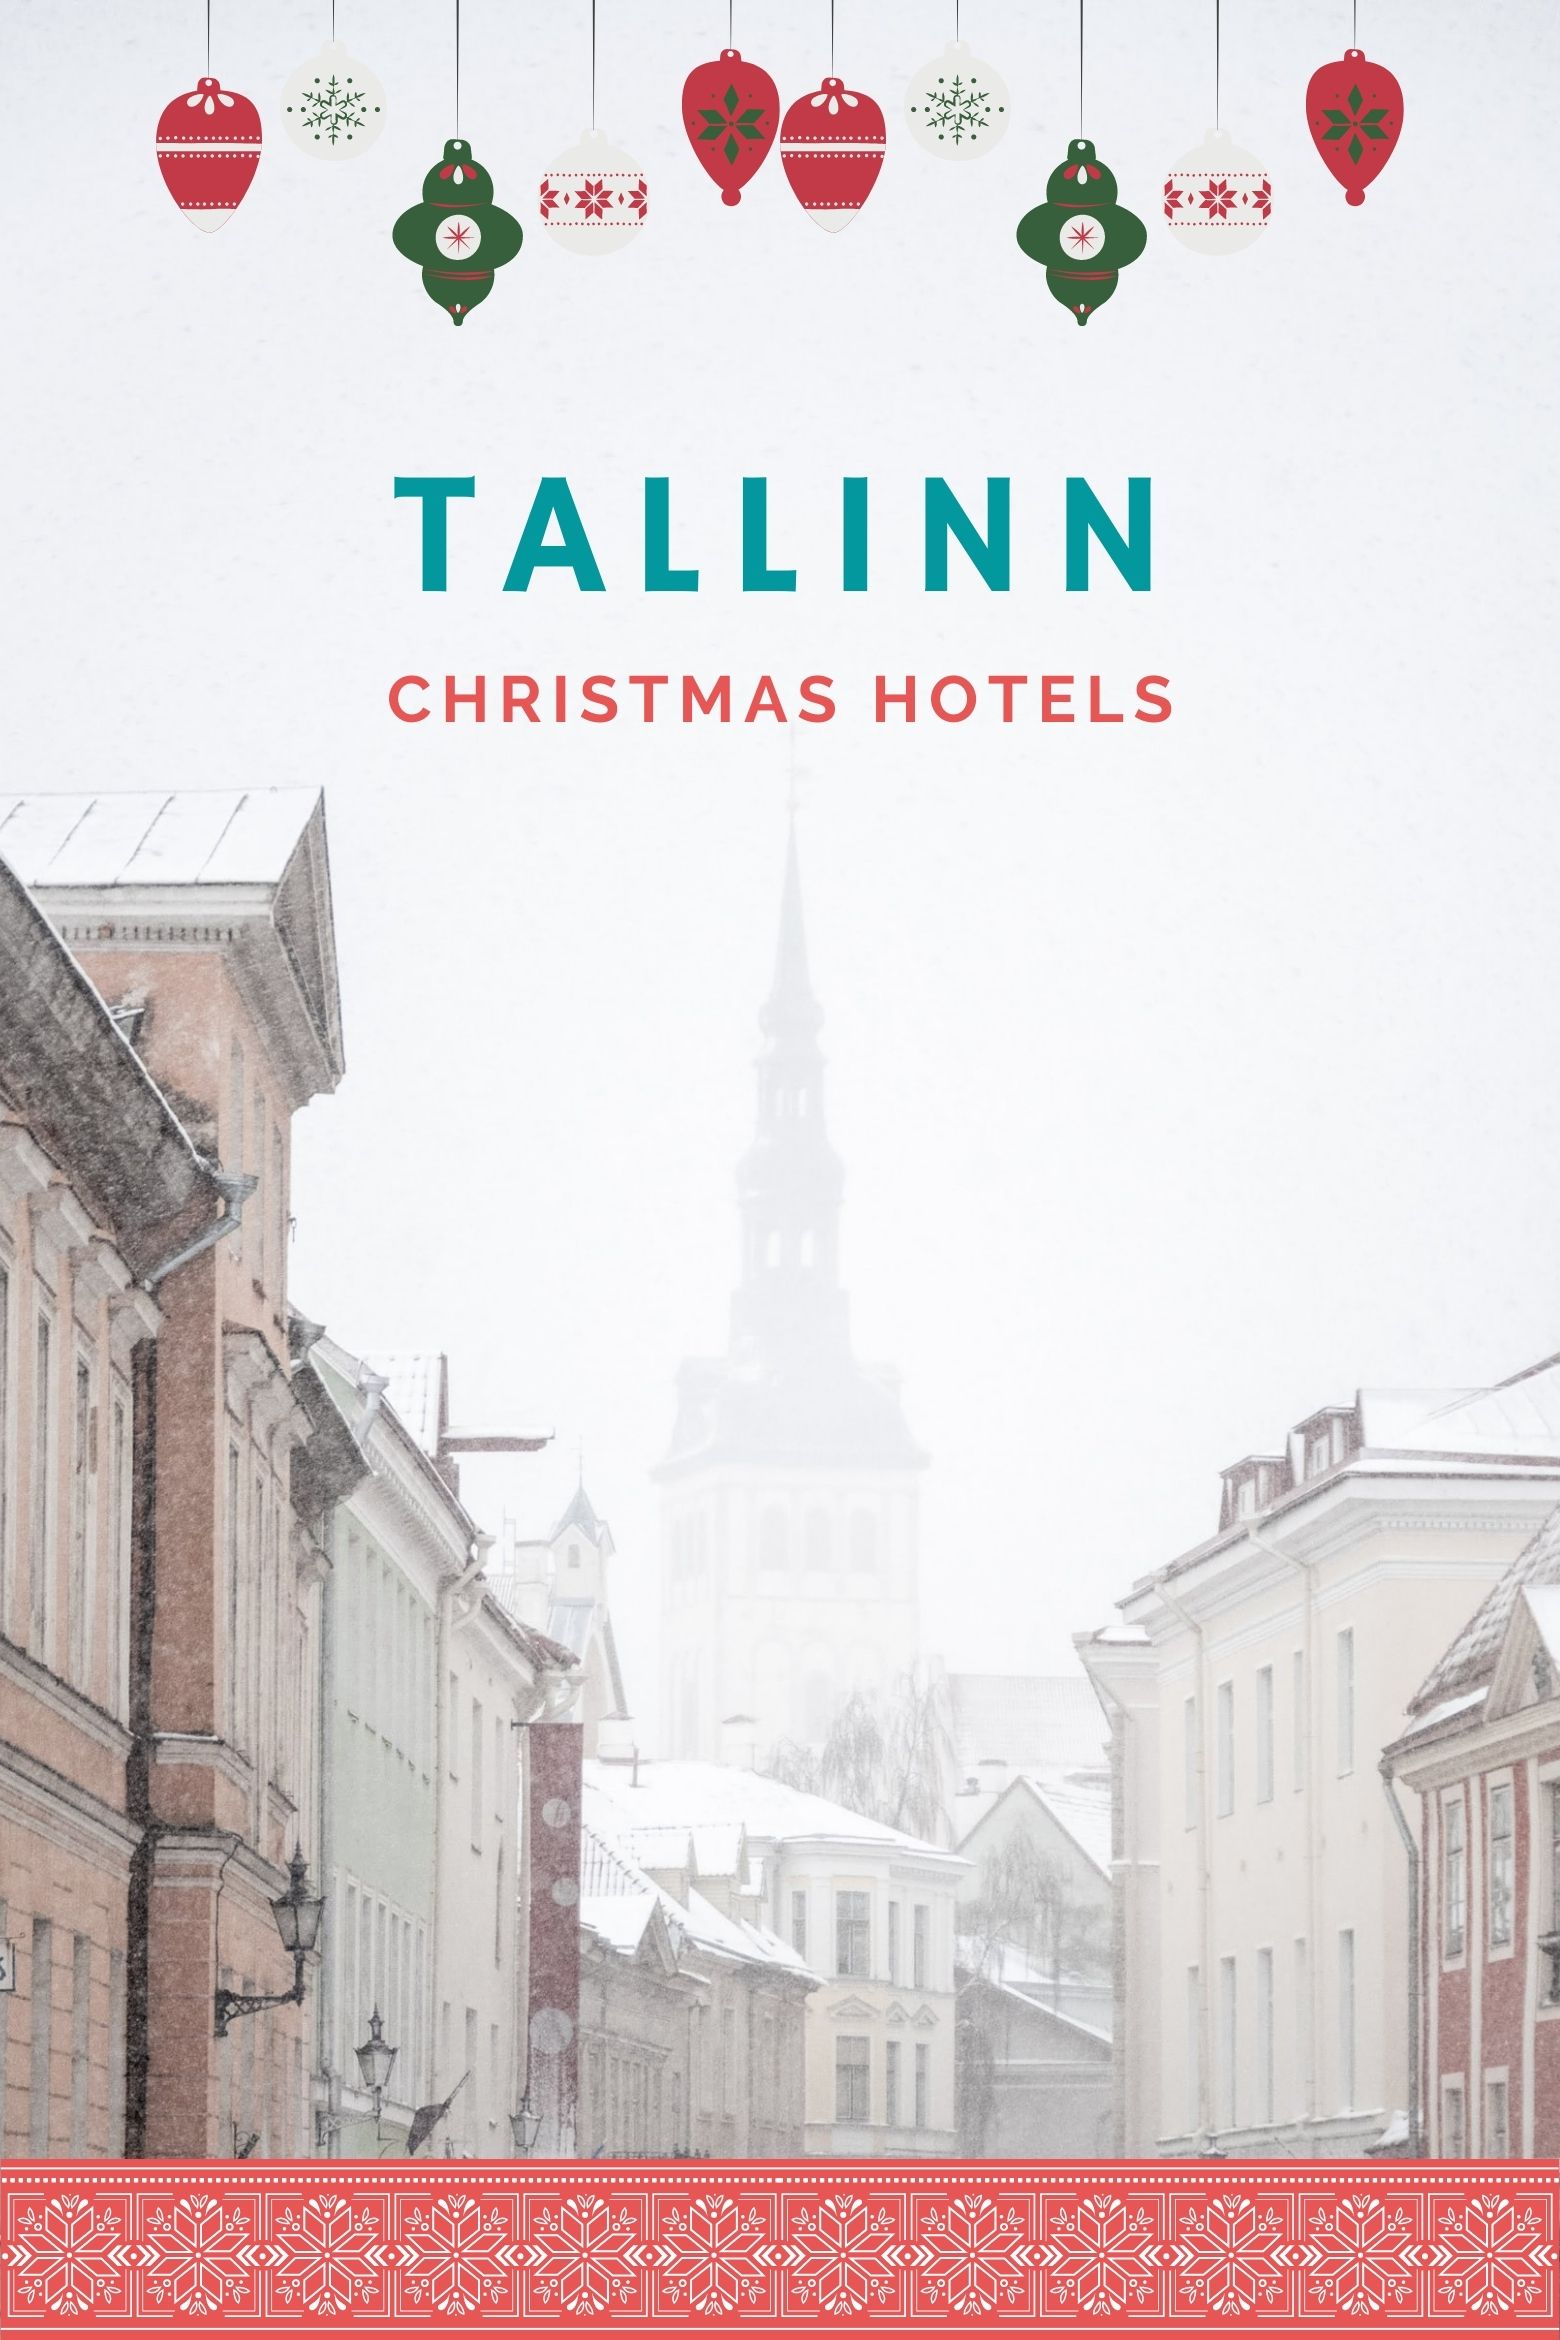 Tallinn old town while snowing.